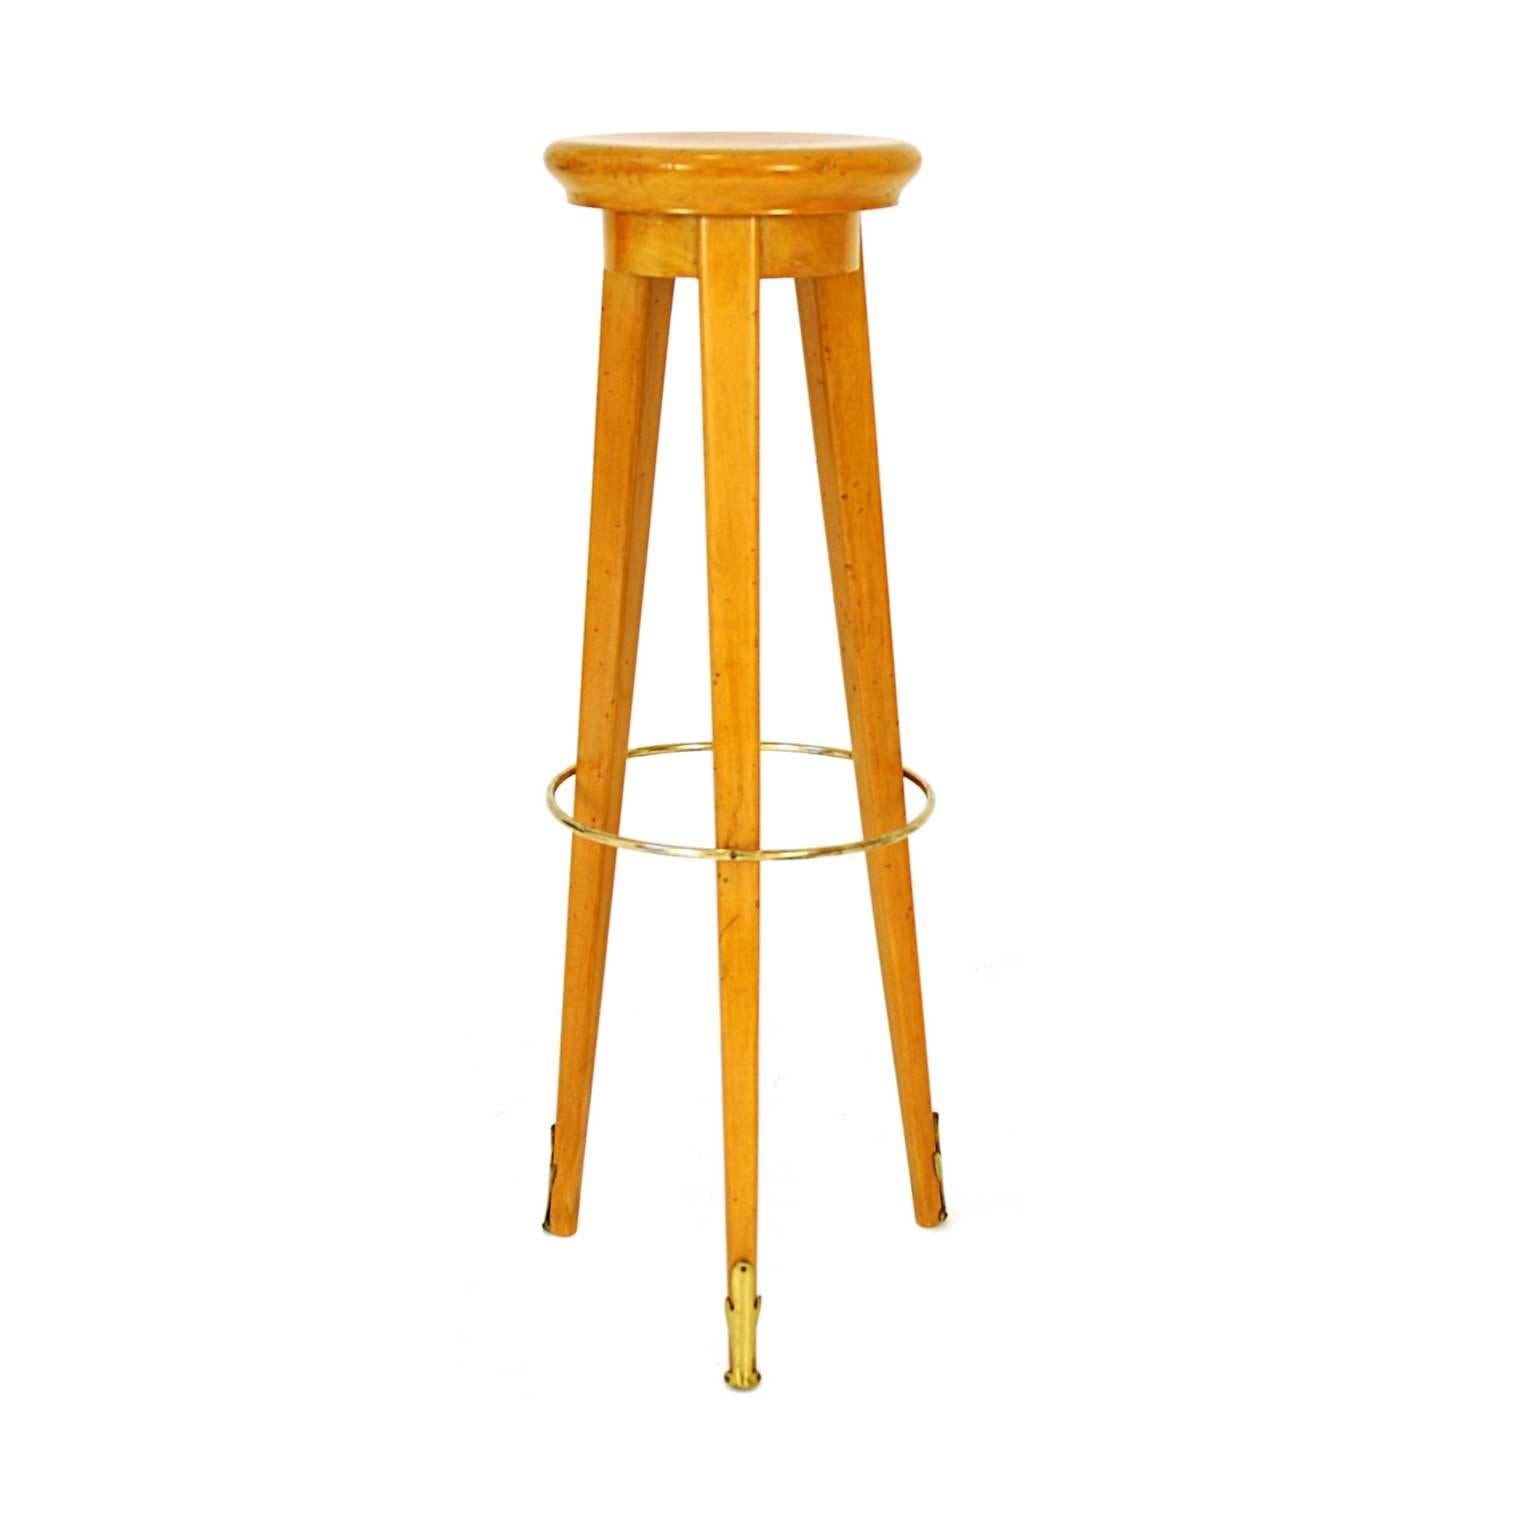 Both bar stools were made in 1950s in France. The item is made of maple. All of the details are made of brass. There are two pieces available.